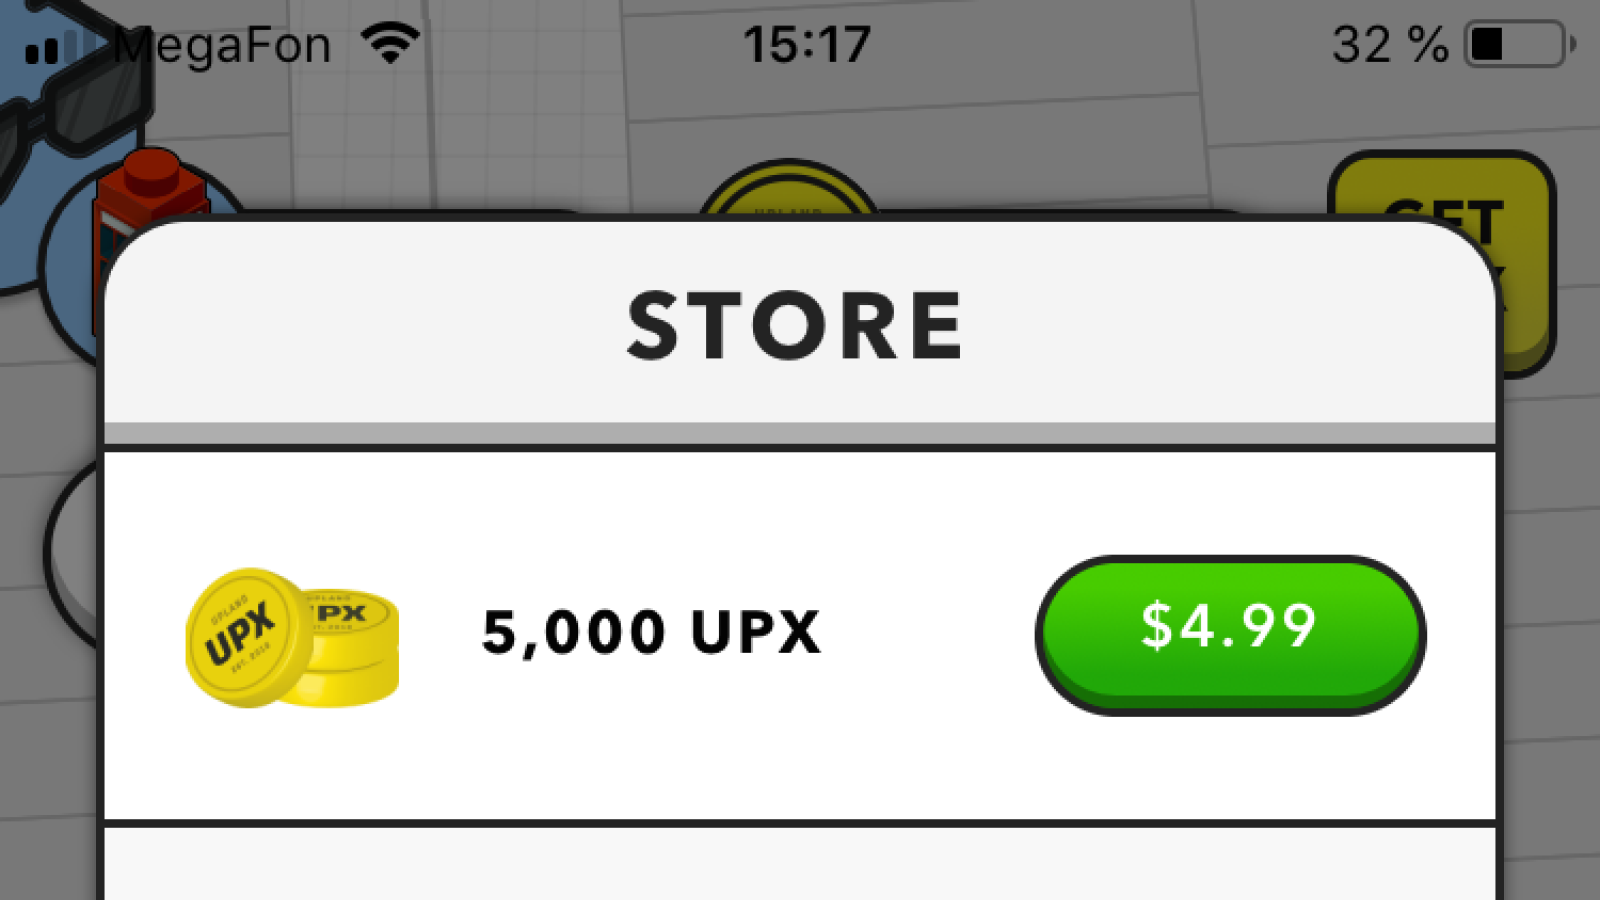 UPX, native in-game asset, can be obtained in Store